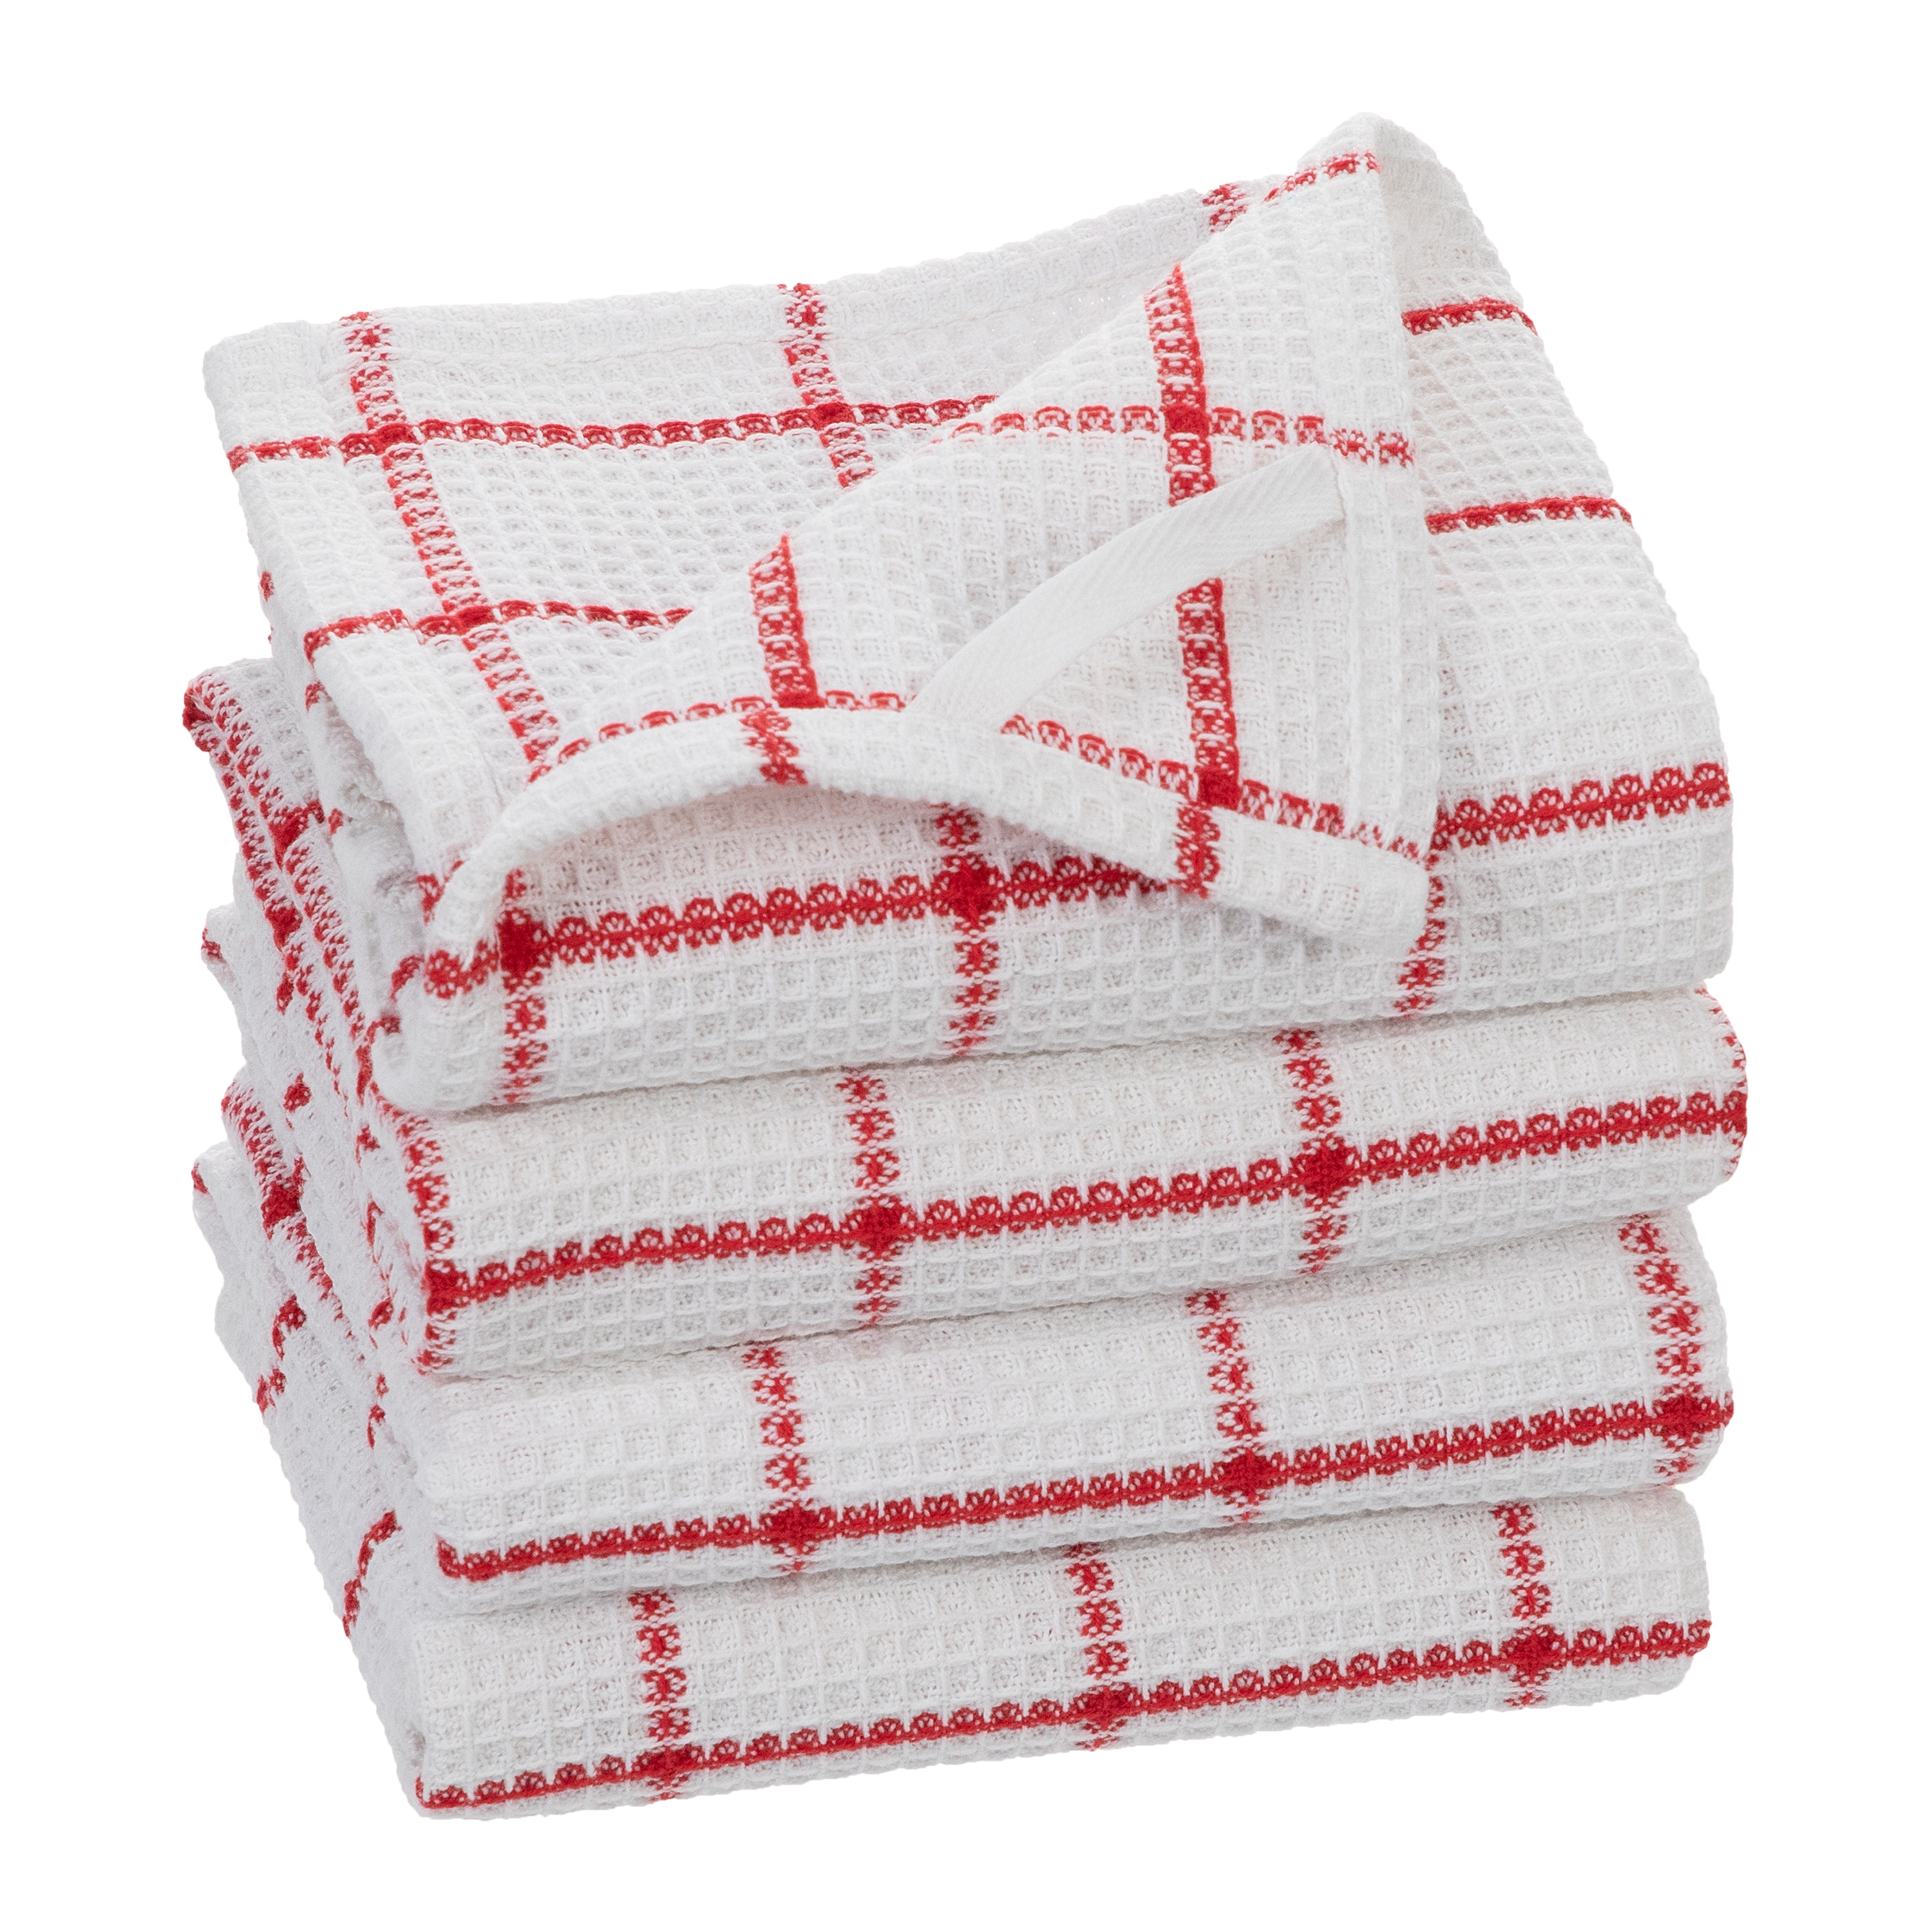 https://ak1.ostkcdn.com/images/products/is/images/direct/18b344214a3df7697aecd669f219d0c64e959b48/Fabstyles-Solo-Waffle-Cotton-Kitchen-Towel-Set-of-4.jpg